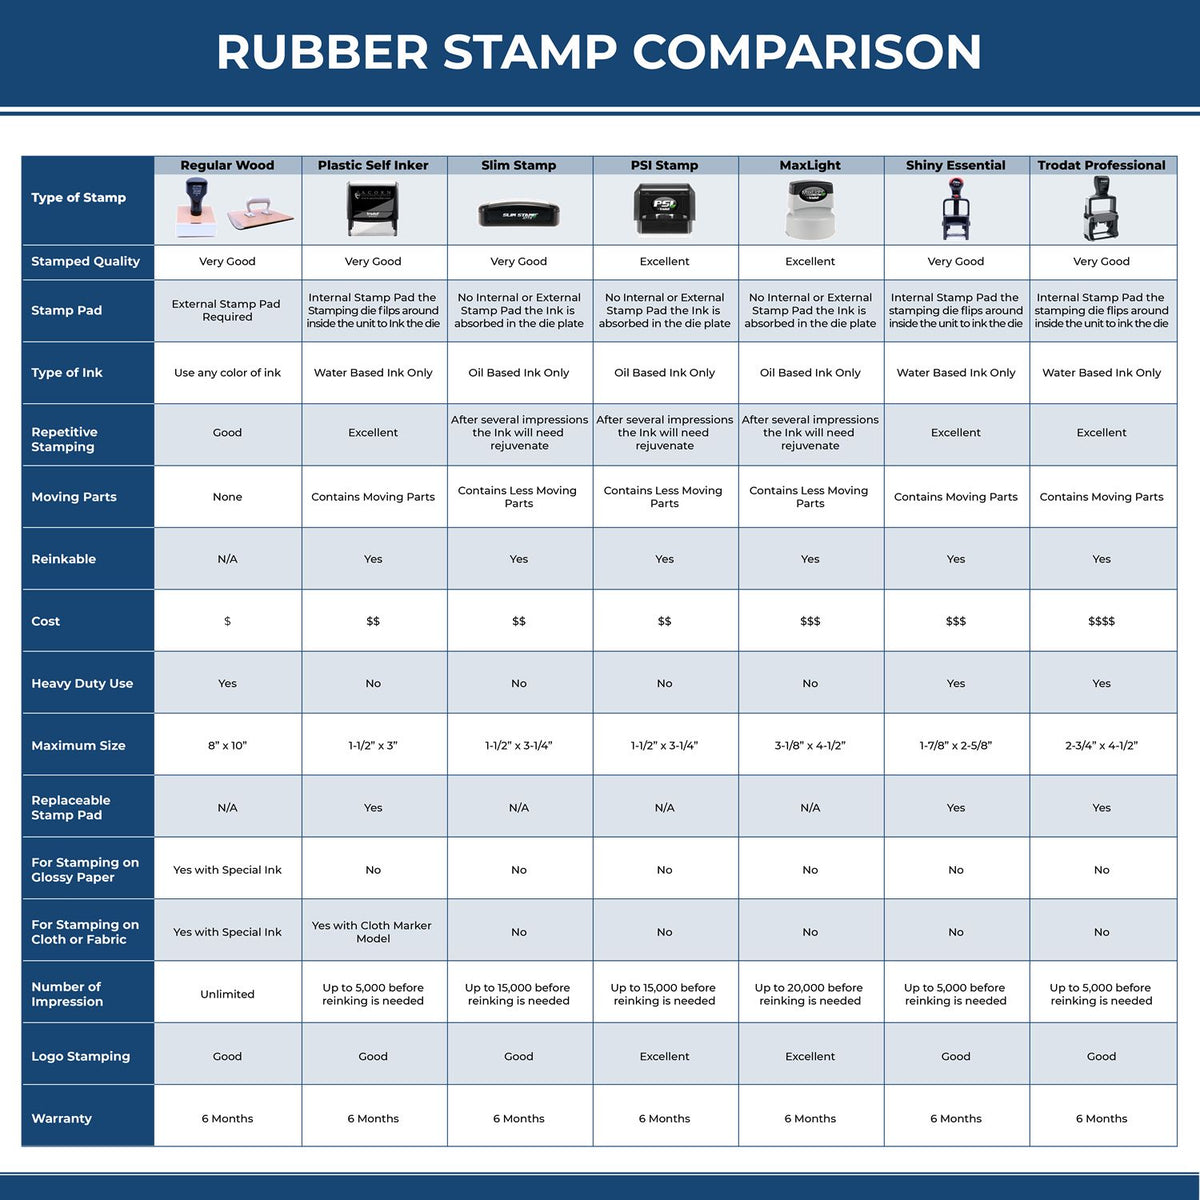 A comparison chart for the different types of mount models available for the Premium MaxLight Pre-Inked Connecticut Landscape Architectural Stamp.